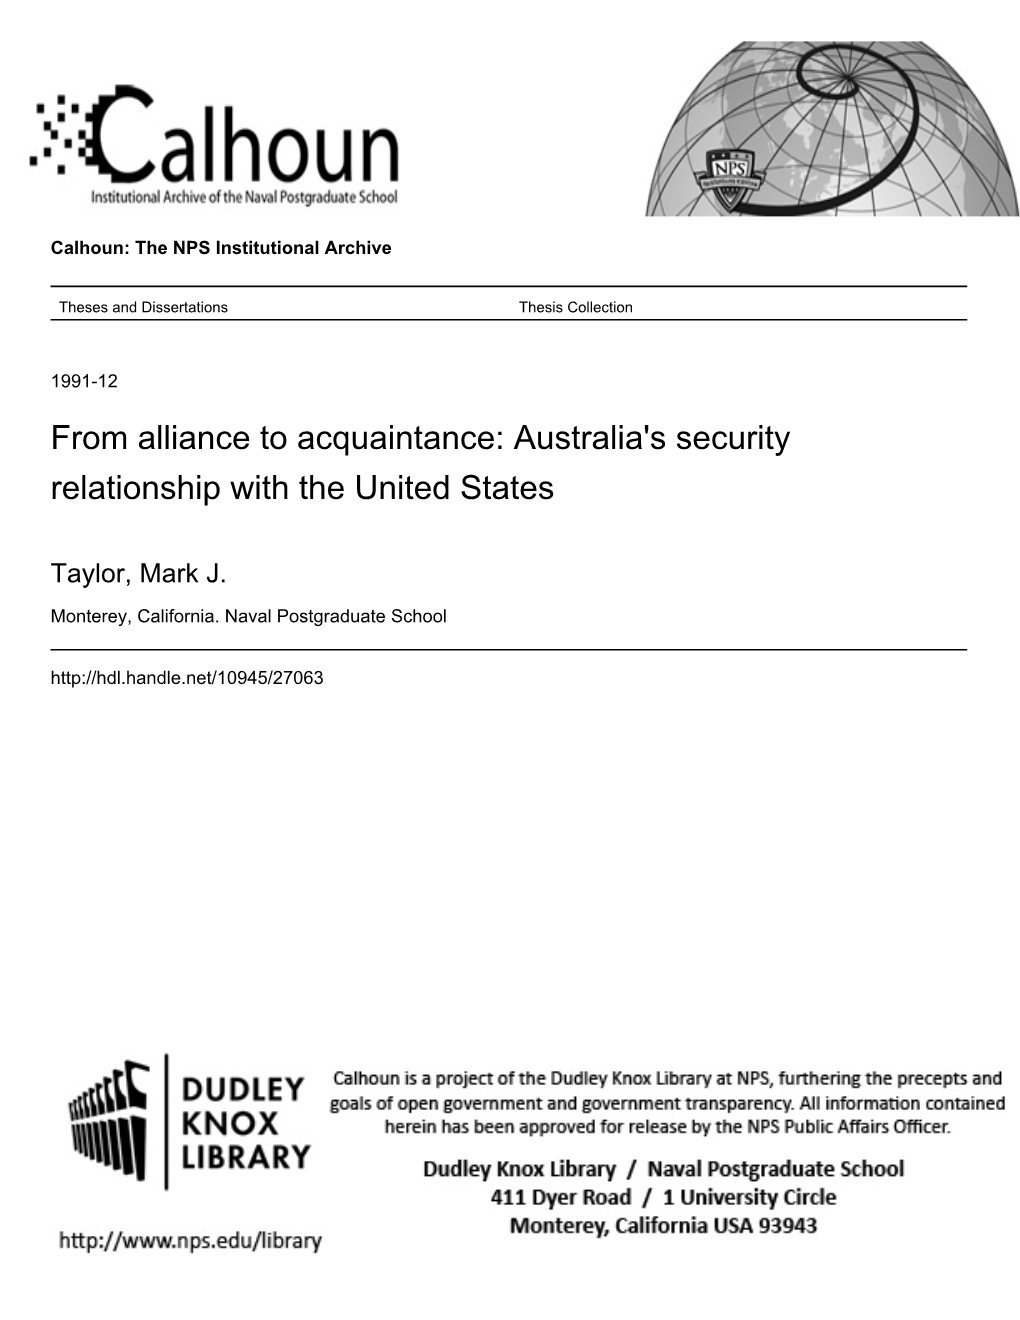 Australia's Security Relationship with the United States